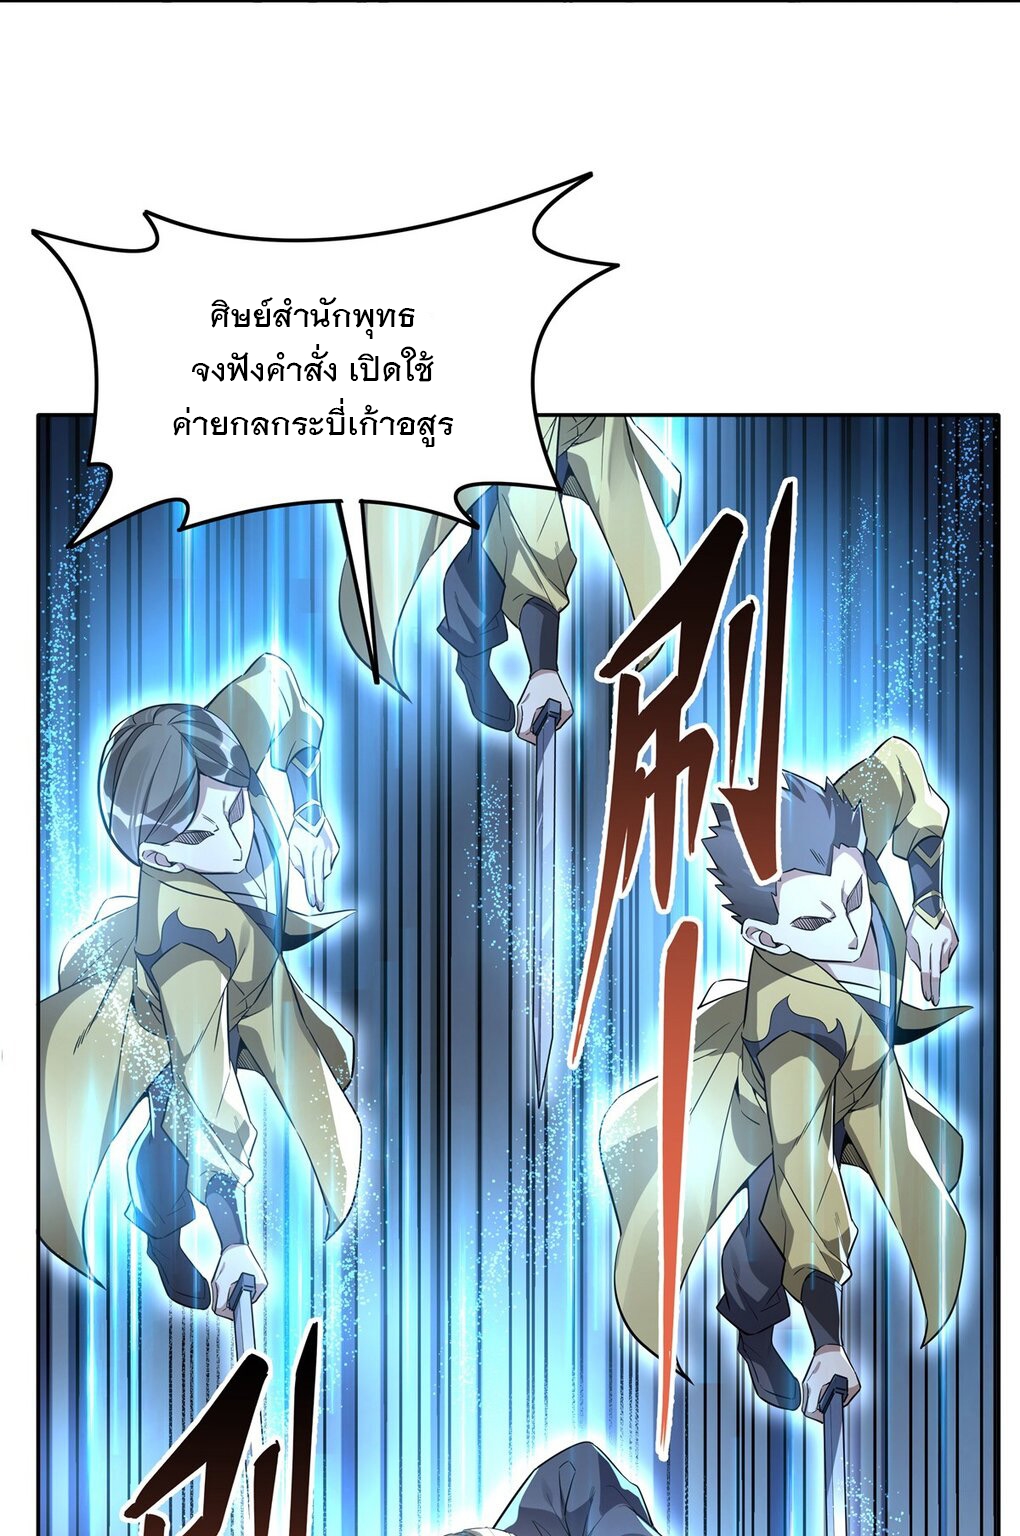 My Female Apprentices Are All Big Shots From the Future Ã Â¸â€¢Ã Â¸Â­Ã Â¸â„¢Ã Â¸â€”Ã Â¸ÂµÃ Â¹Ë† 98 (5)